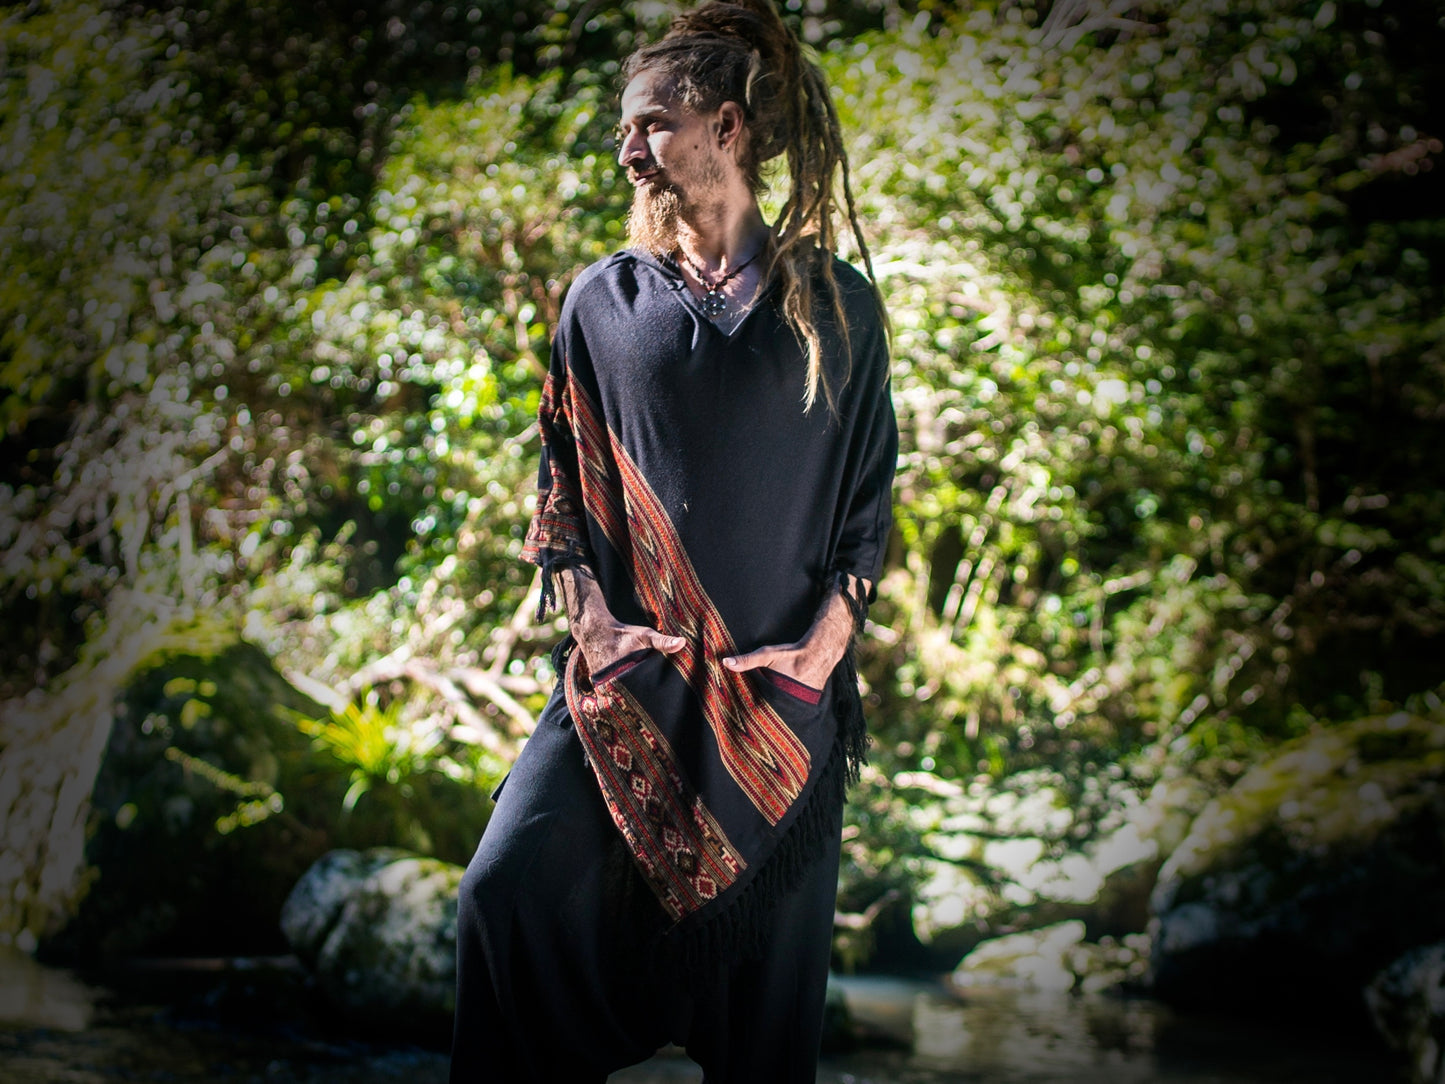 Mens Black Poncho Yak Wool Handmade with Large Hood and pockets, Earthy Tribal Pattern